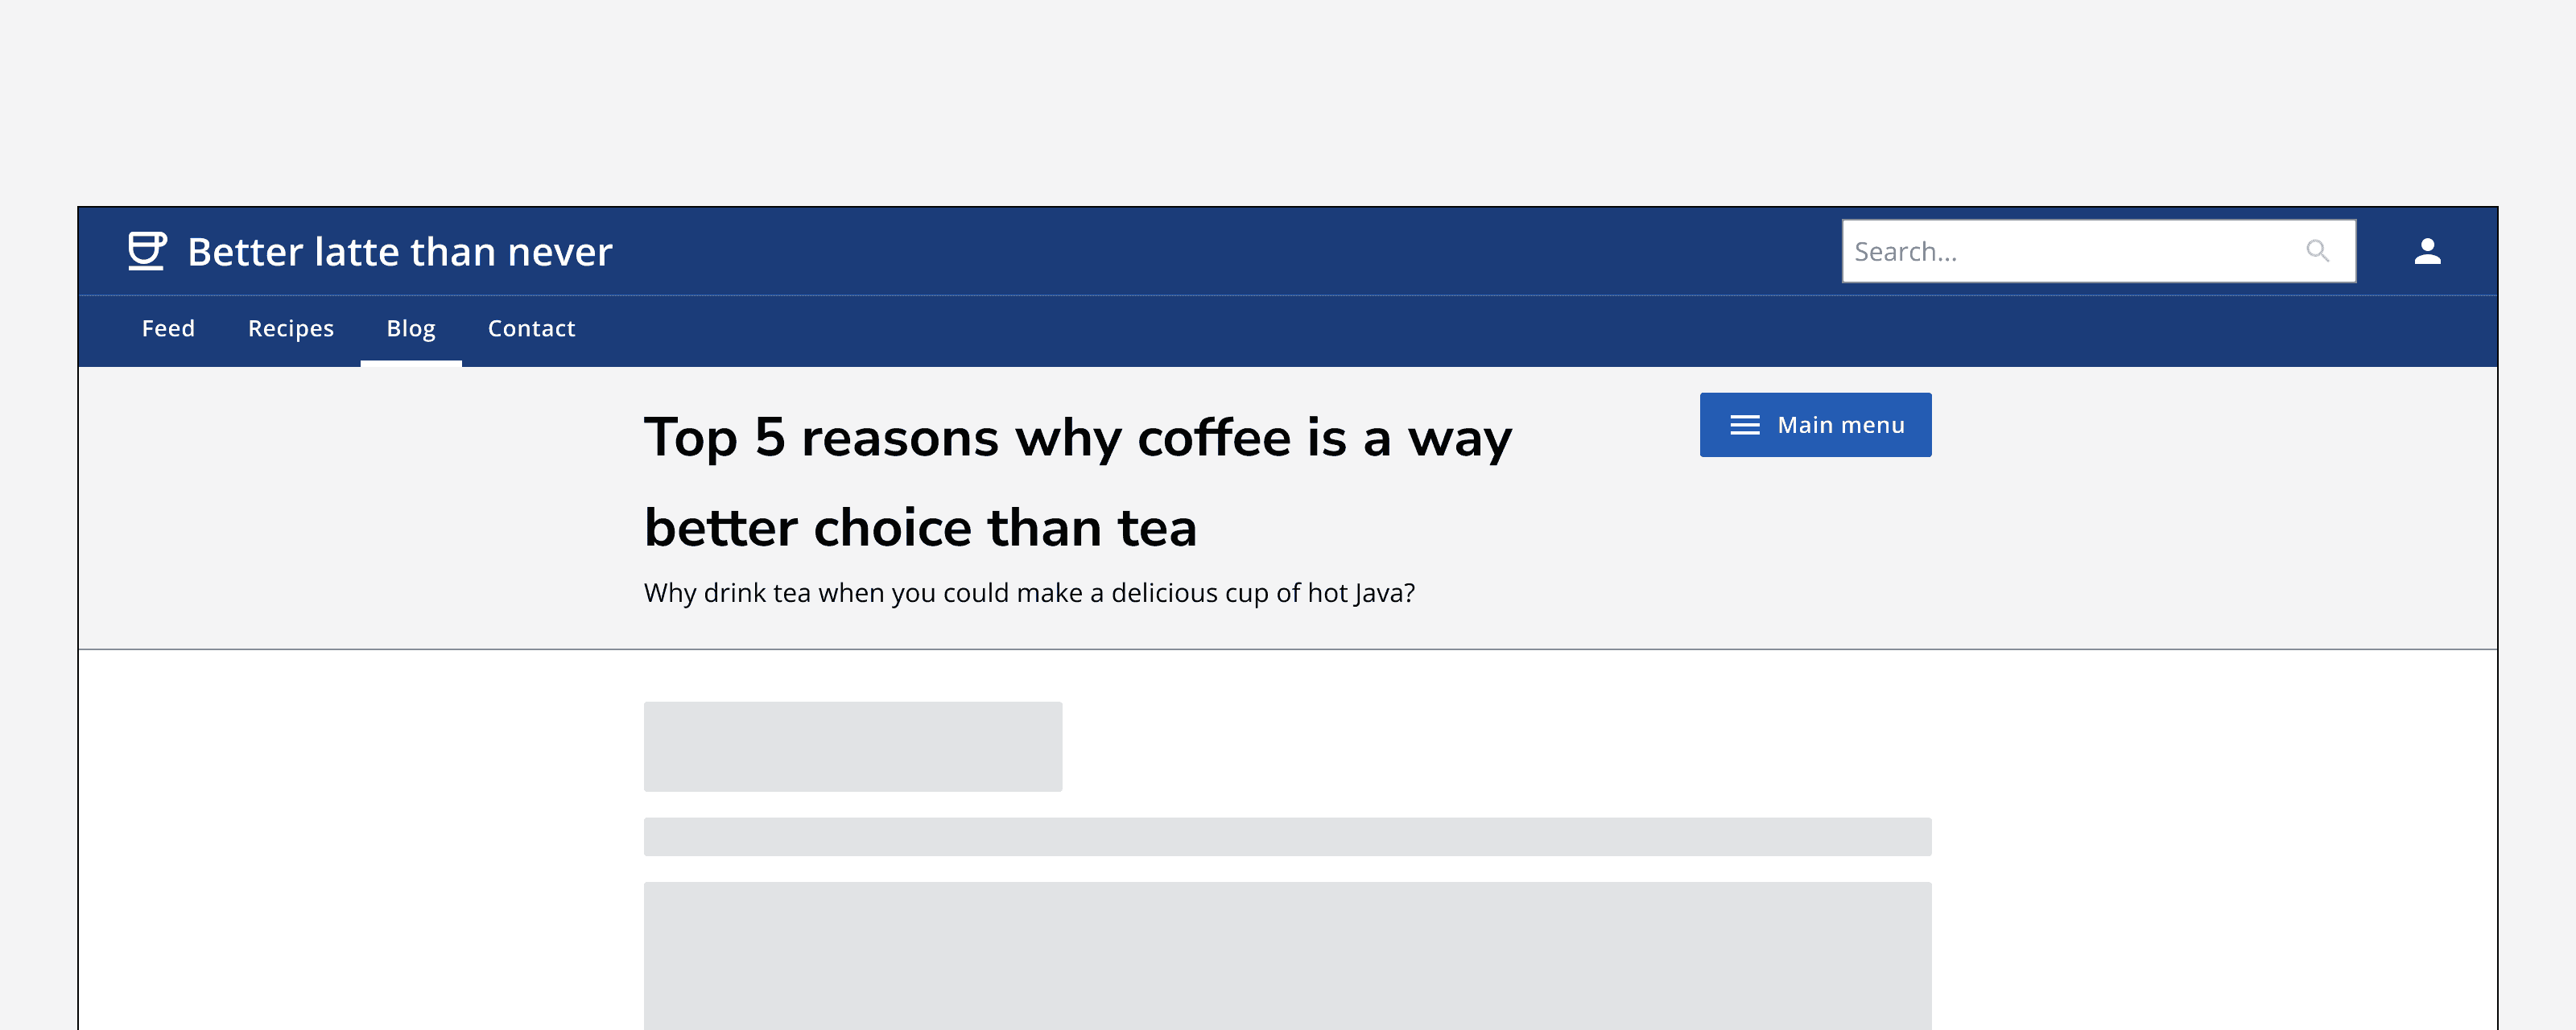 An example app called ‘Better latte than never’ that displays a page titled ‘Top 5 reasons why coffee is a way better choice than tea’. The page’s page header contains an action button titled ‘Main menu’.